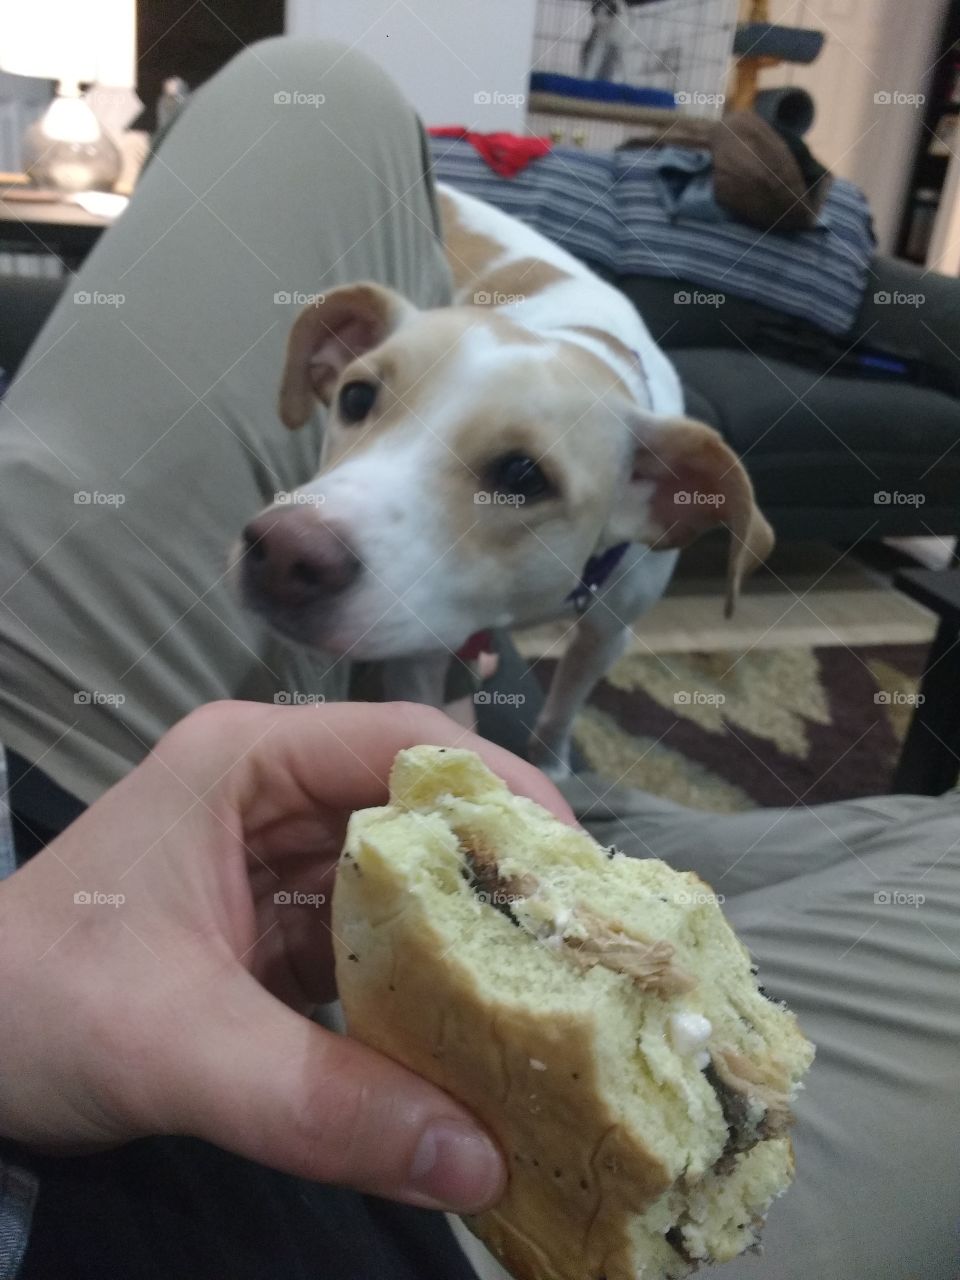 Dog very interested in sandwich